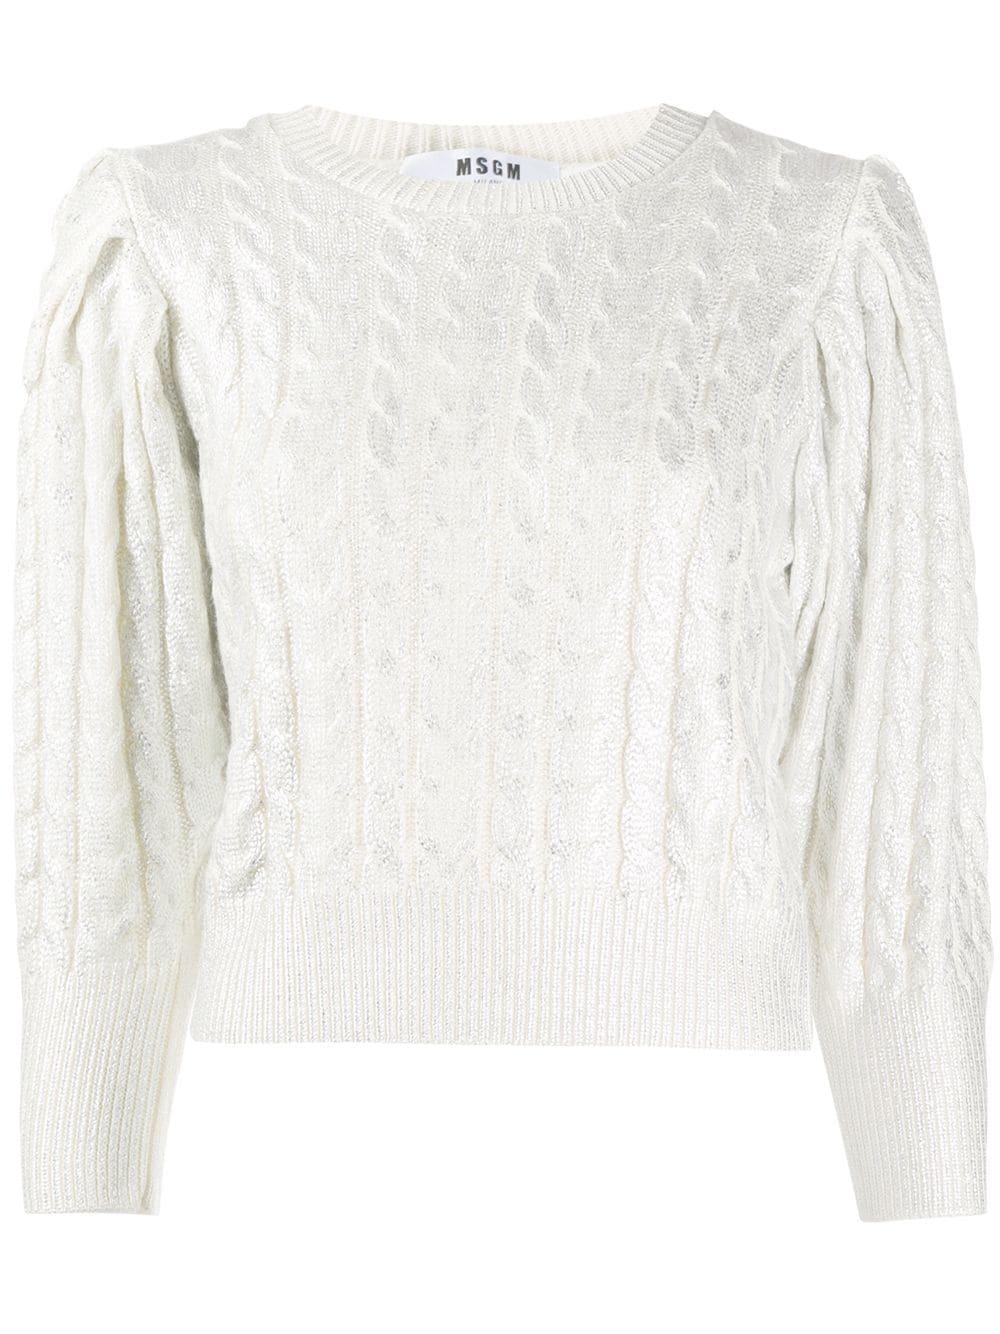 MSGM Wool Cropped Cable-knit Sweater in Silver (Metallic) - Lyst